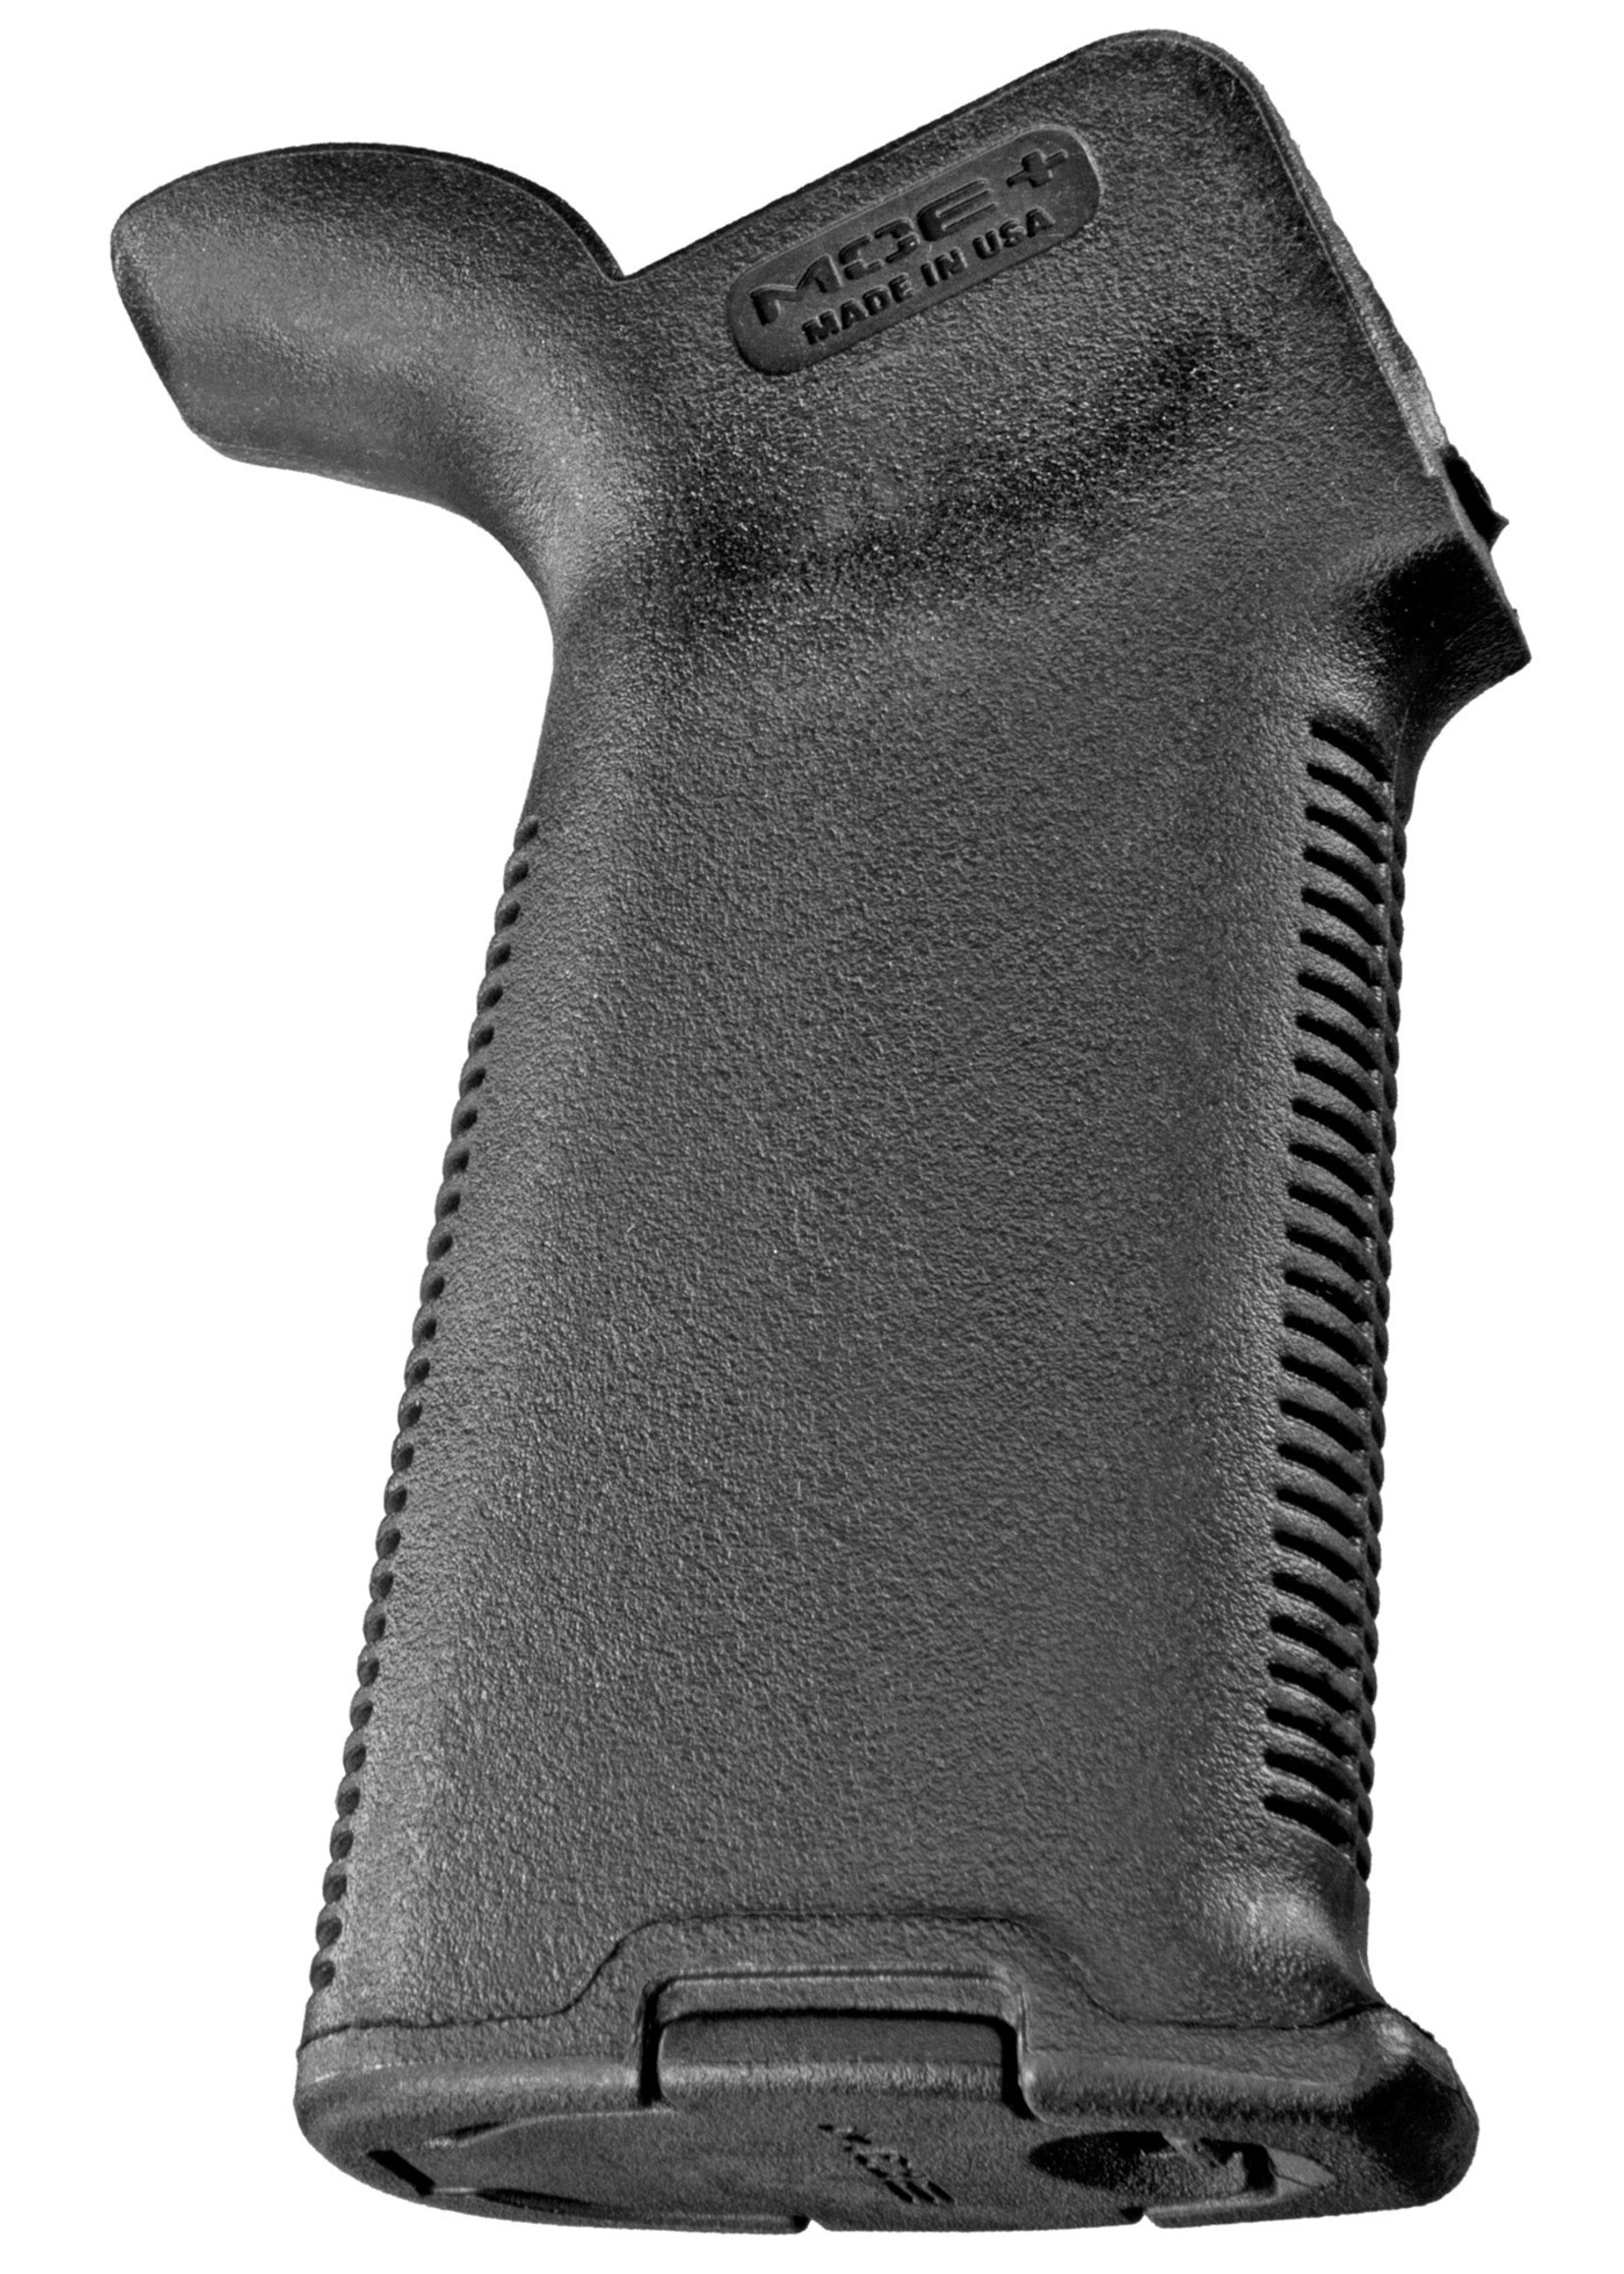 Magpul Industries Magpul MAG416-BLK MOE+ Grip Black Polymer w/OverMolded Rubber Textured Finish Fits AR-15/AR-10/M16/M4/M110/SR25